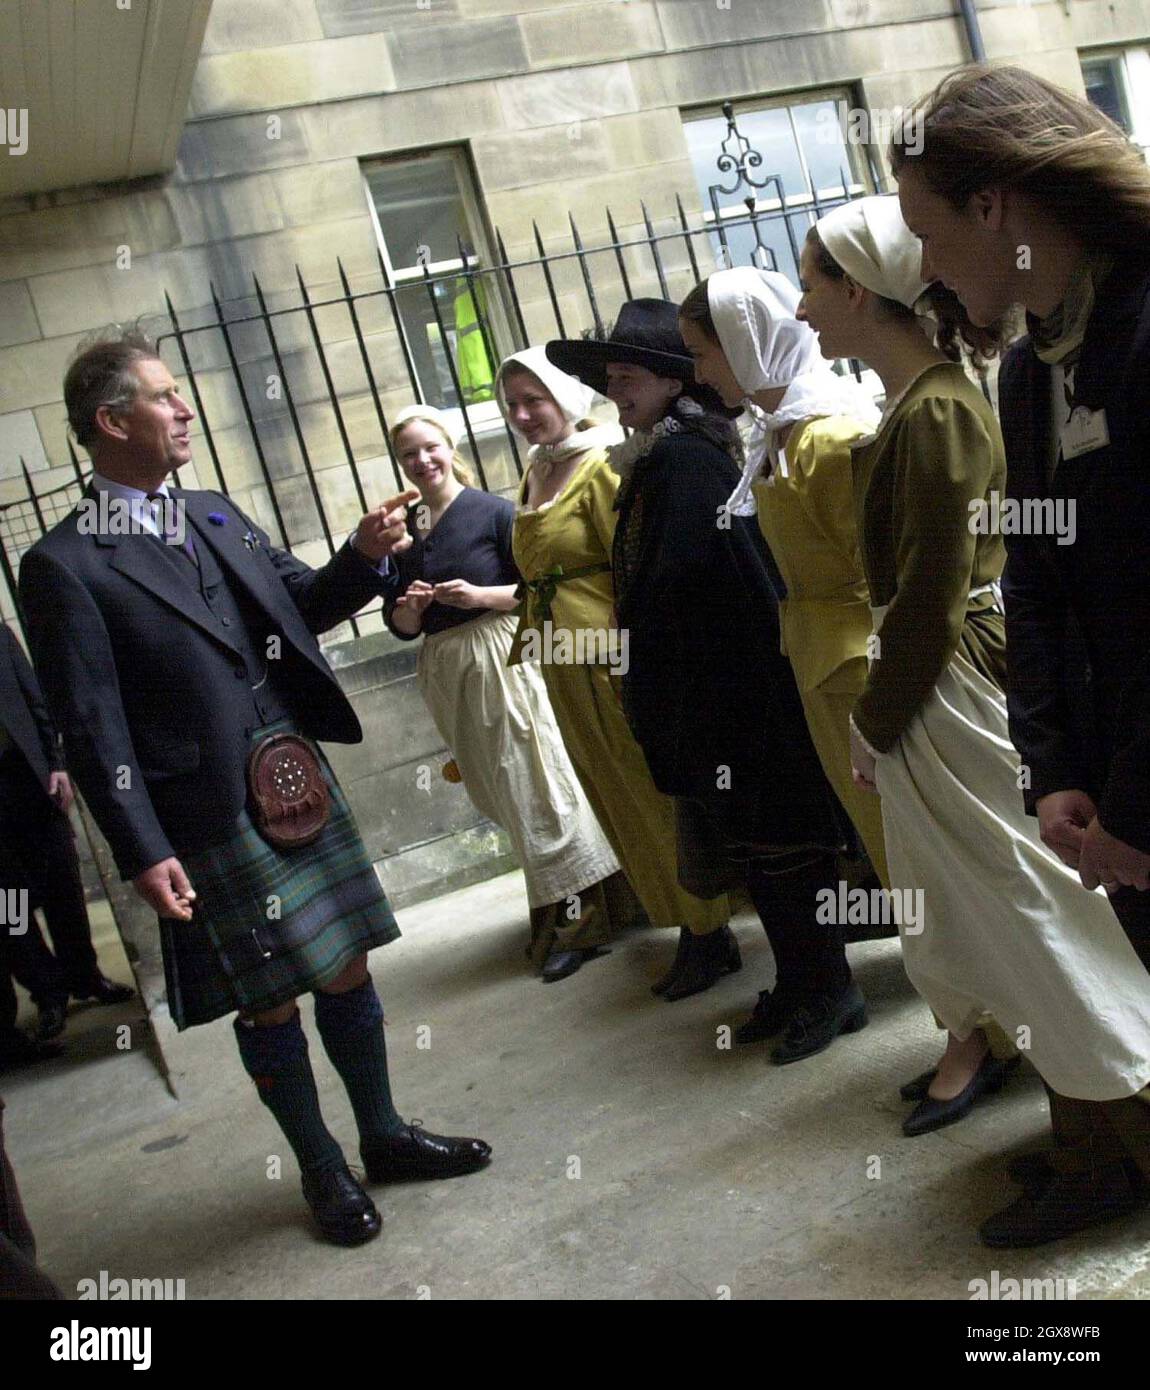 The Prince of Wales is greeted by guides in period costumes as he enters the Real Mary King's Close in Edinburgh. The Prince of Wales visited some of Scotland's top visitor attractions in a bid to raise the profile of the country's tourism industry. Â©Anwar Hussein/allaction.co.uk  Stock Photo